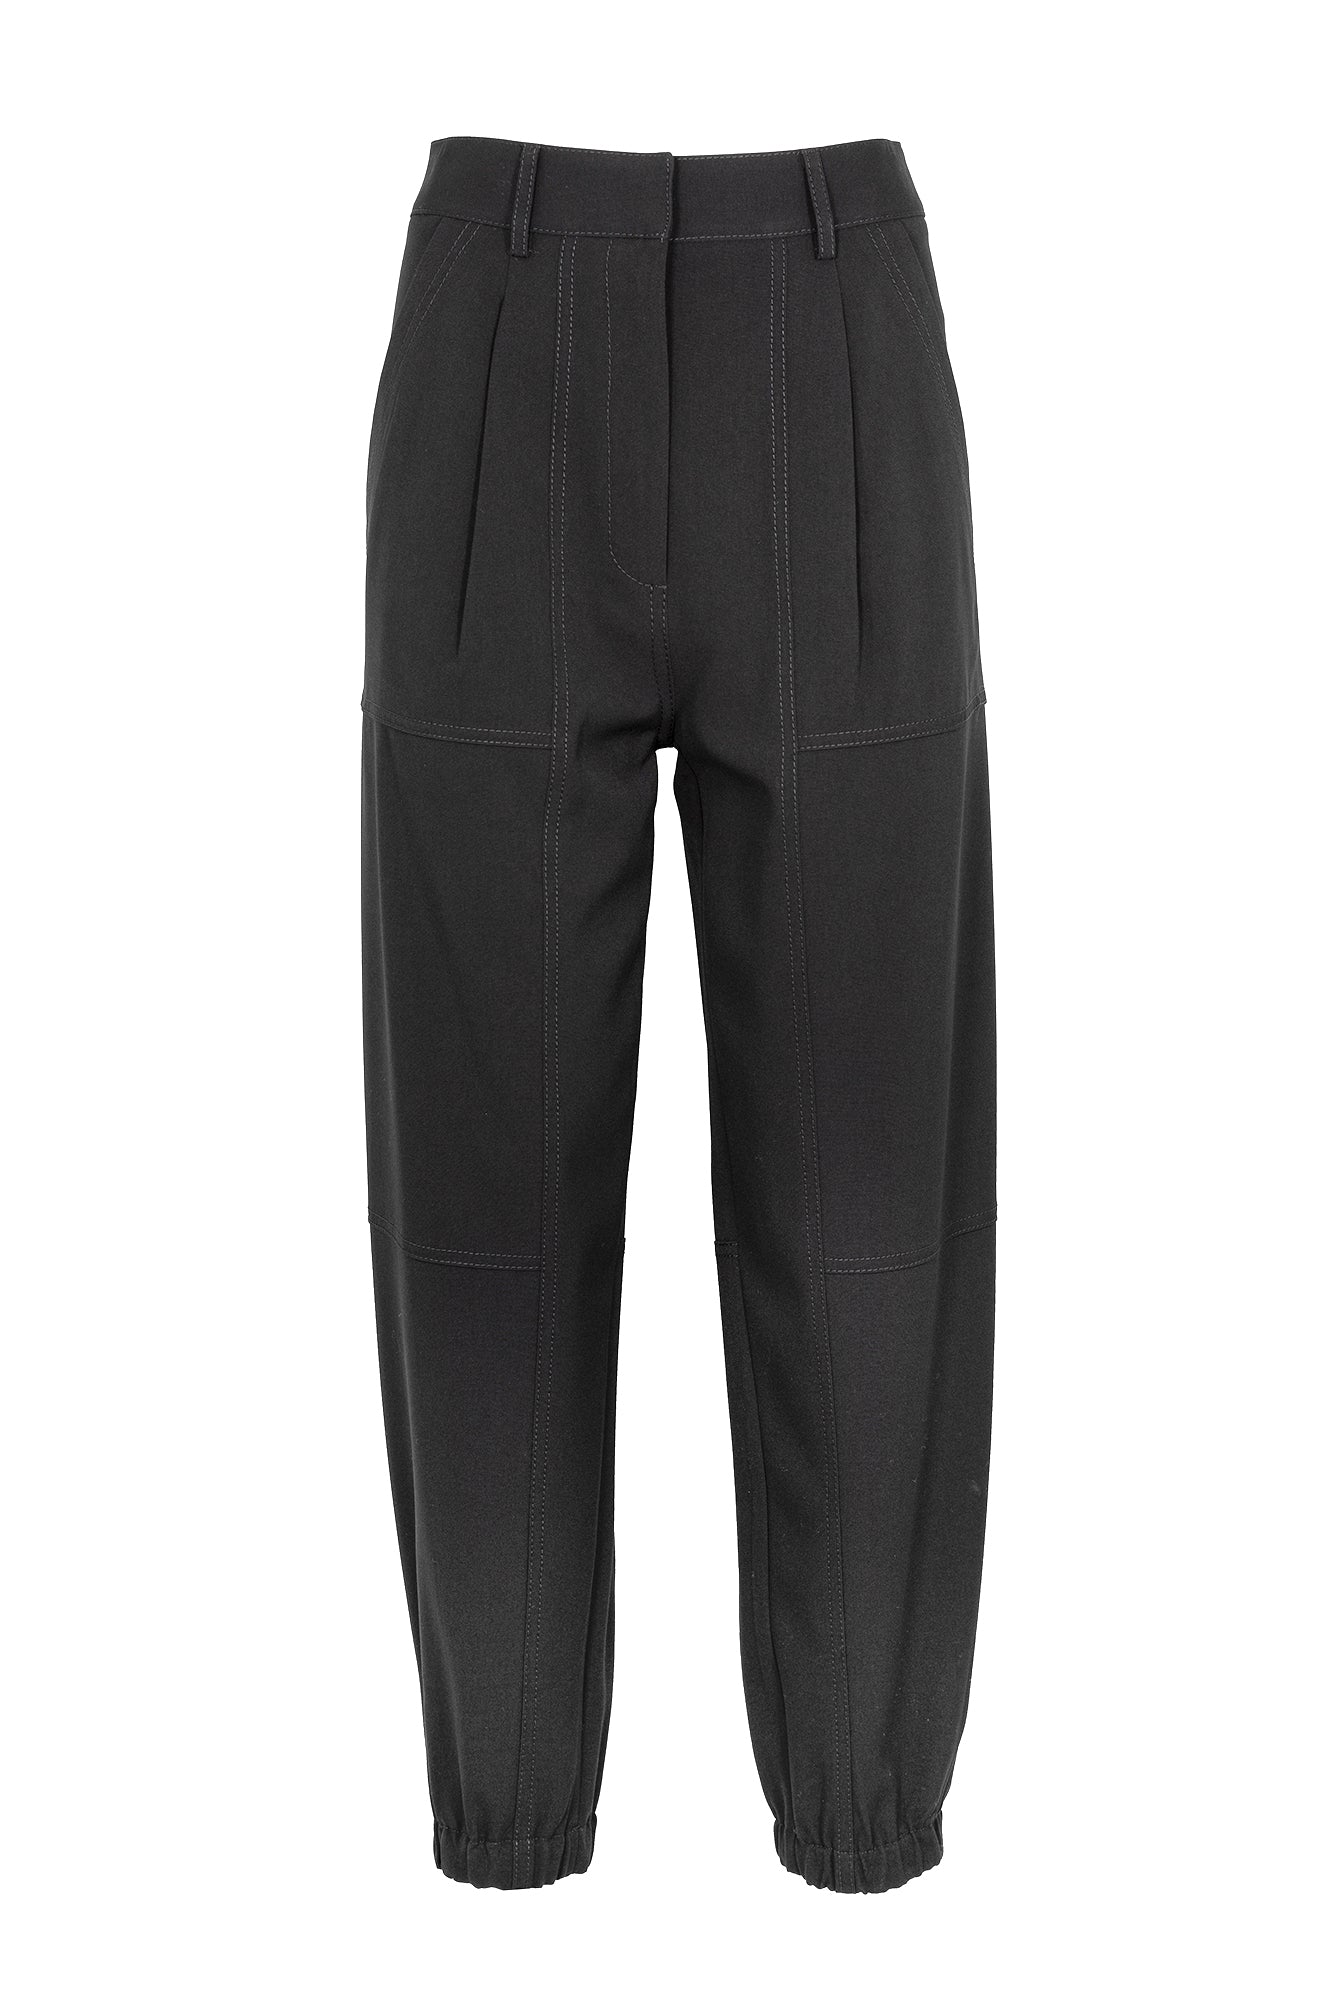 Black cargo trousers with cuff at hem